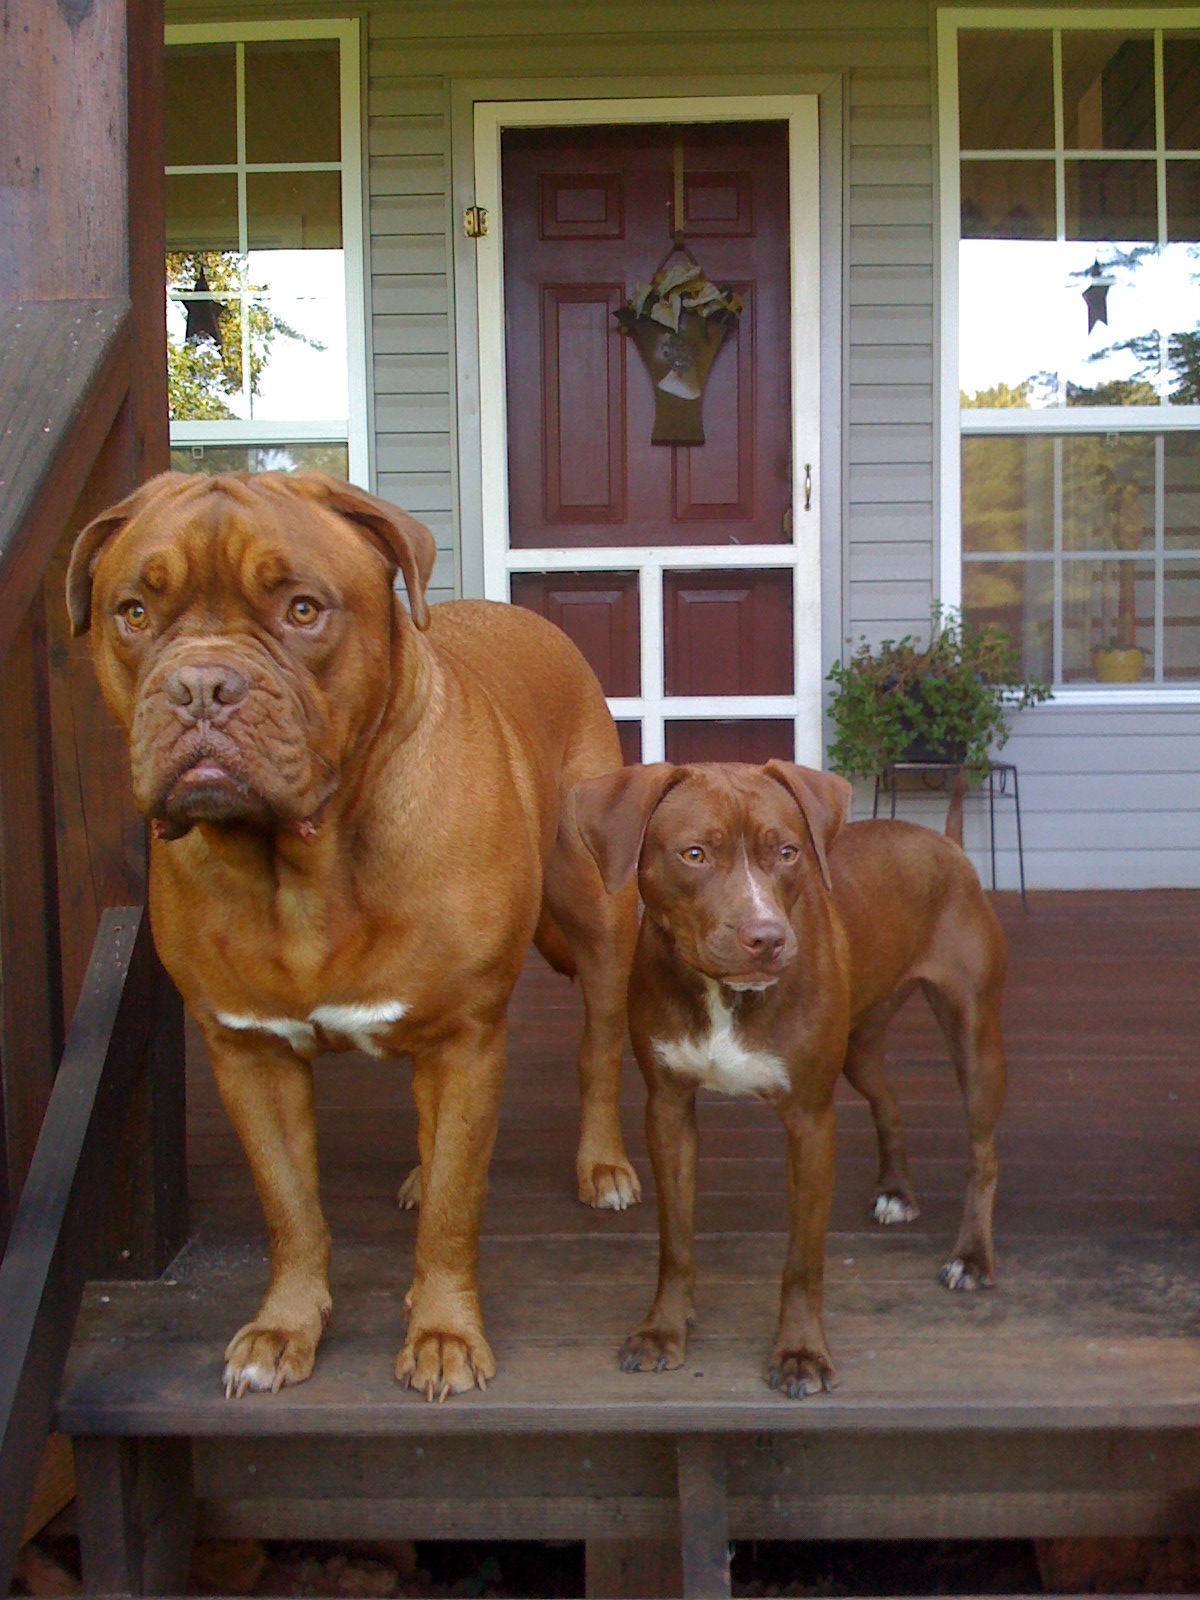 Mastiff Dog Picture #4719 | Pet Gallery | PetPeoplesPlace.com